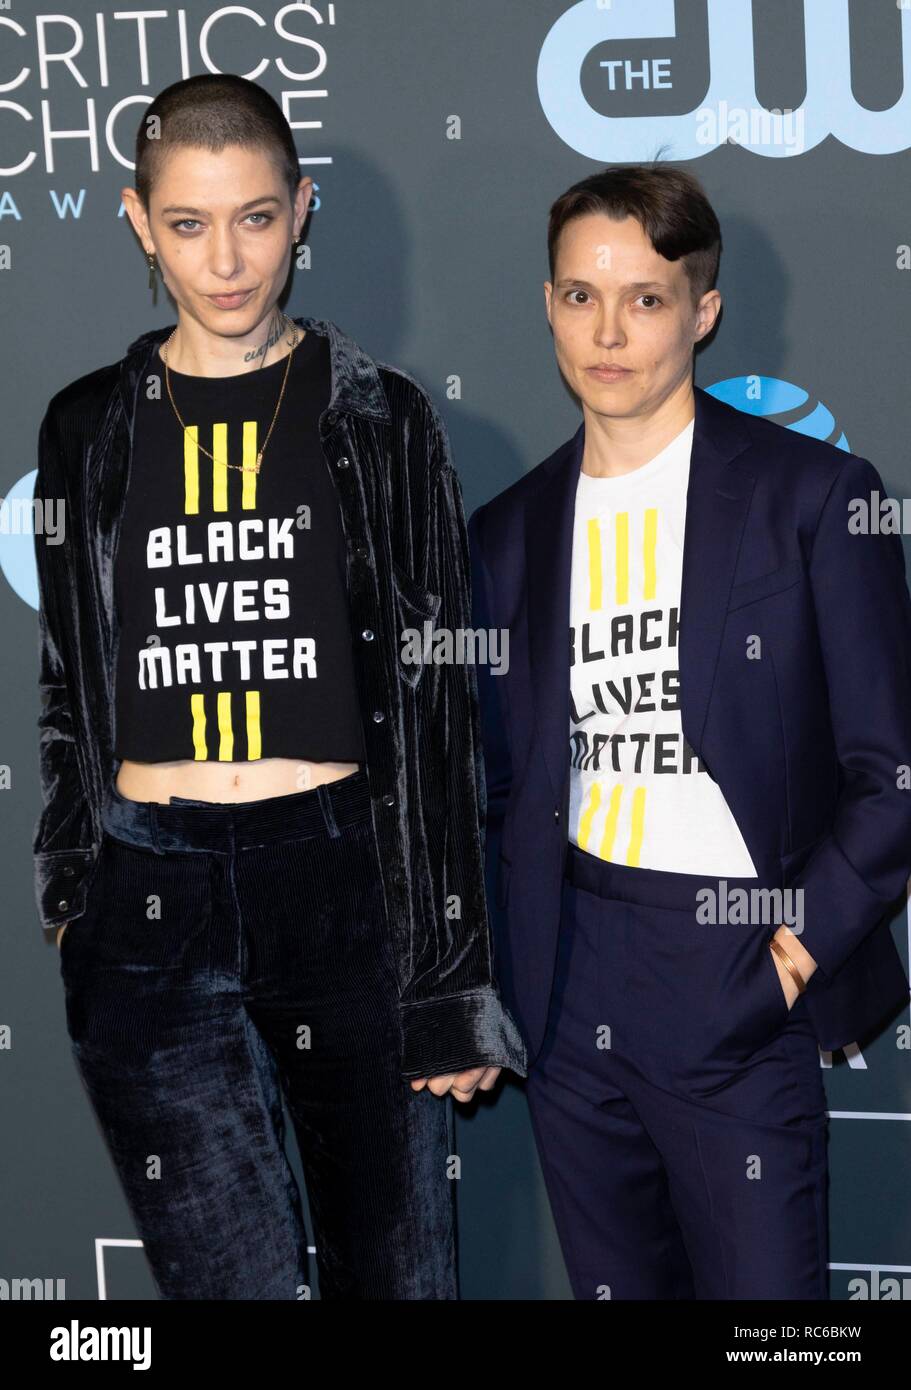 Asia Kate Dillon (l) and guest attend the 24th Annual Critics' Choice Awards at Barker Hangar in Santa Monica, Los Angeles, California, USA, on 13 January 2019. | usage worldwide Stock Photo